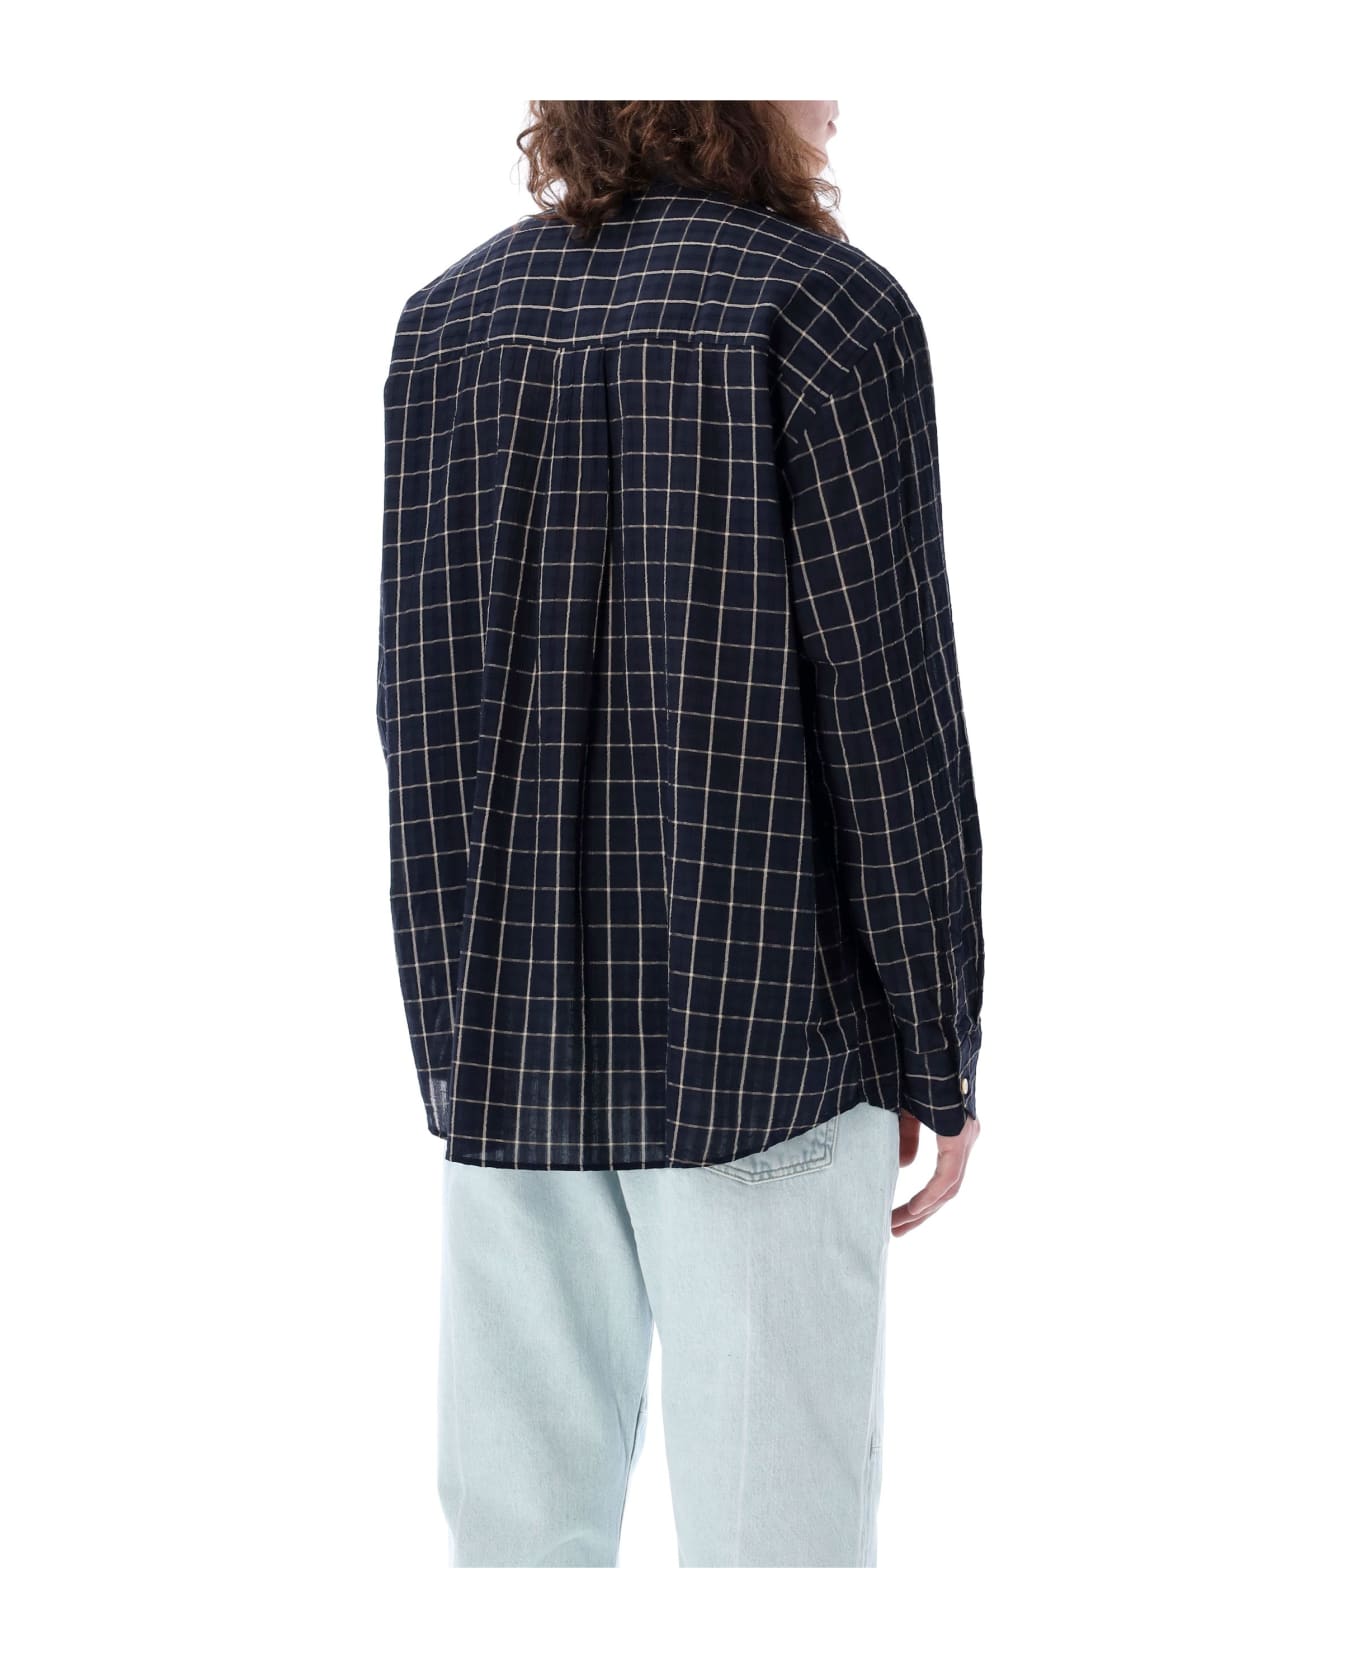 Our Legacy Above Shirt - DARK MEDITERIAN CHECK シャツ